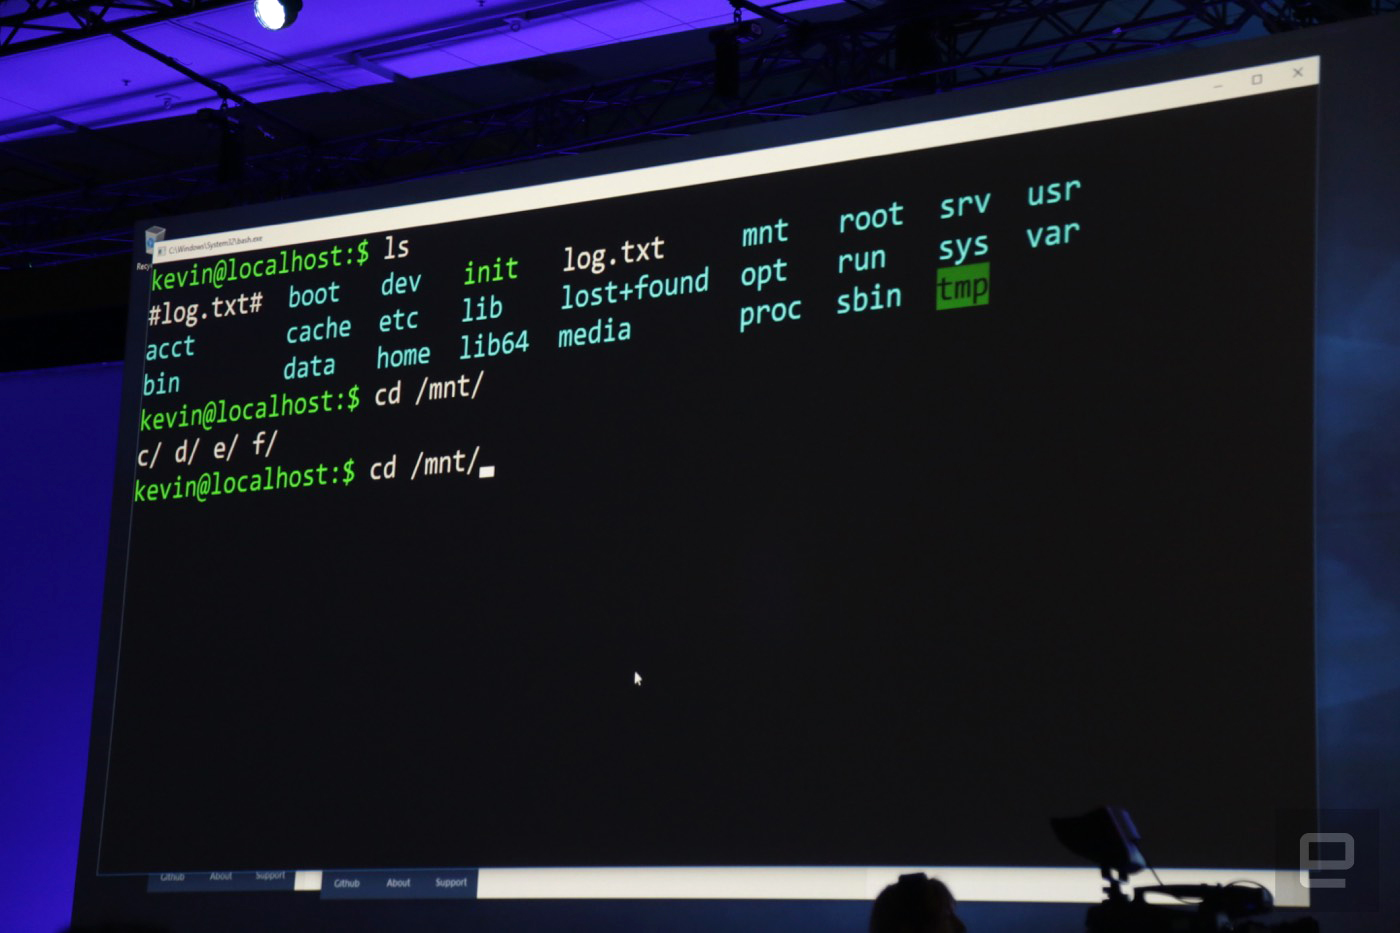 Linux command line tools are coming to Windows 10